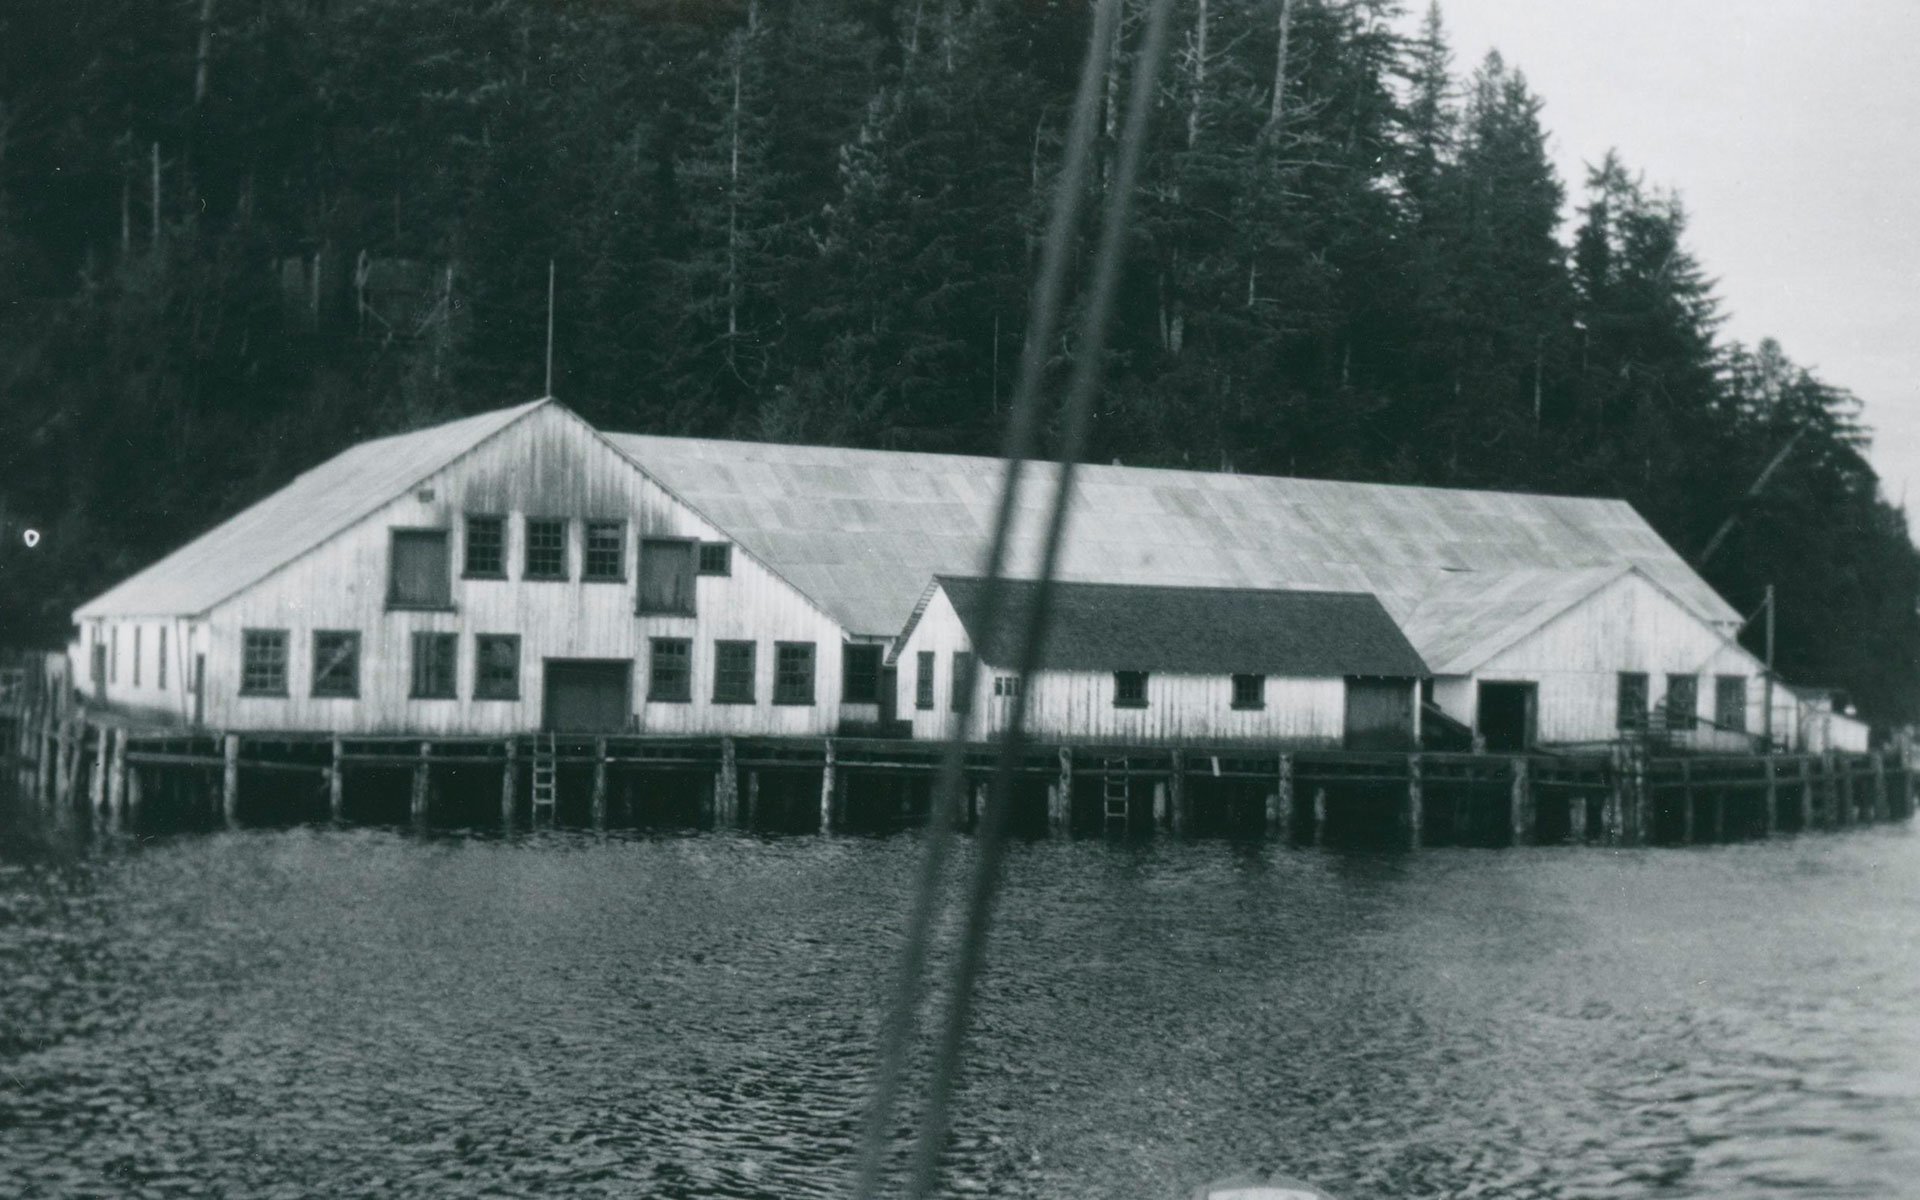 Shushartie Cannery buildings photographed from a boat on the water. Two ropes, part of the rigging of a boat, are visible in the foreground. The cannery sits at the waters edge with a wooden hill behind it.